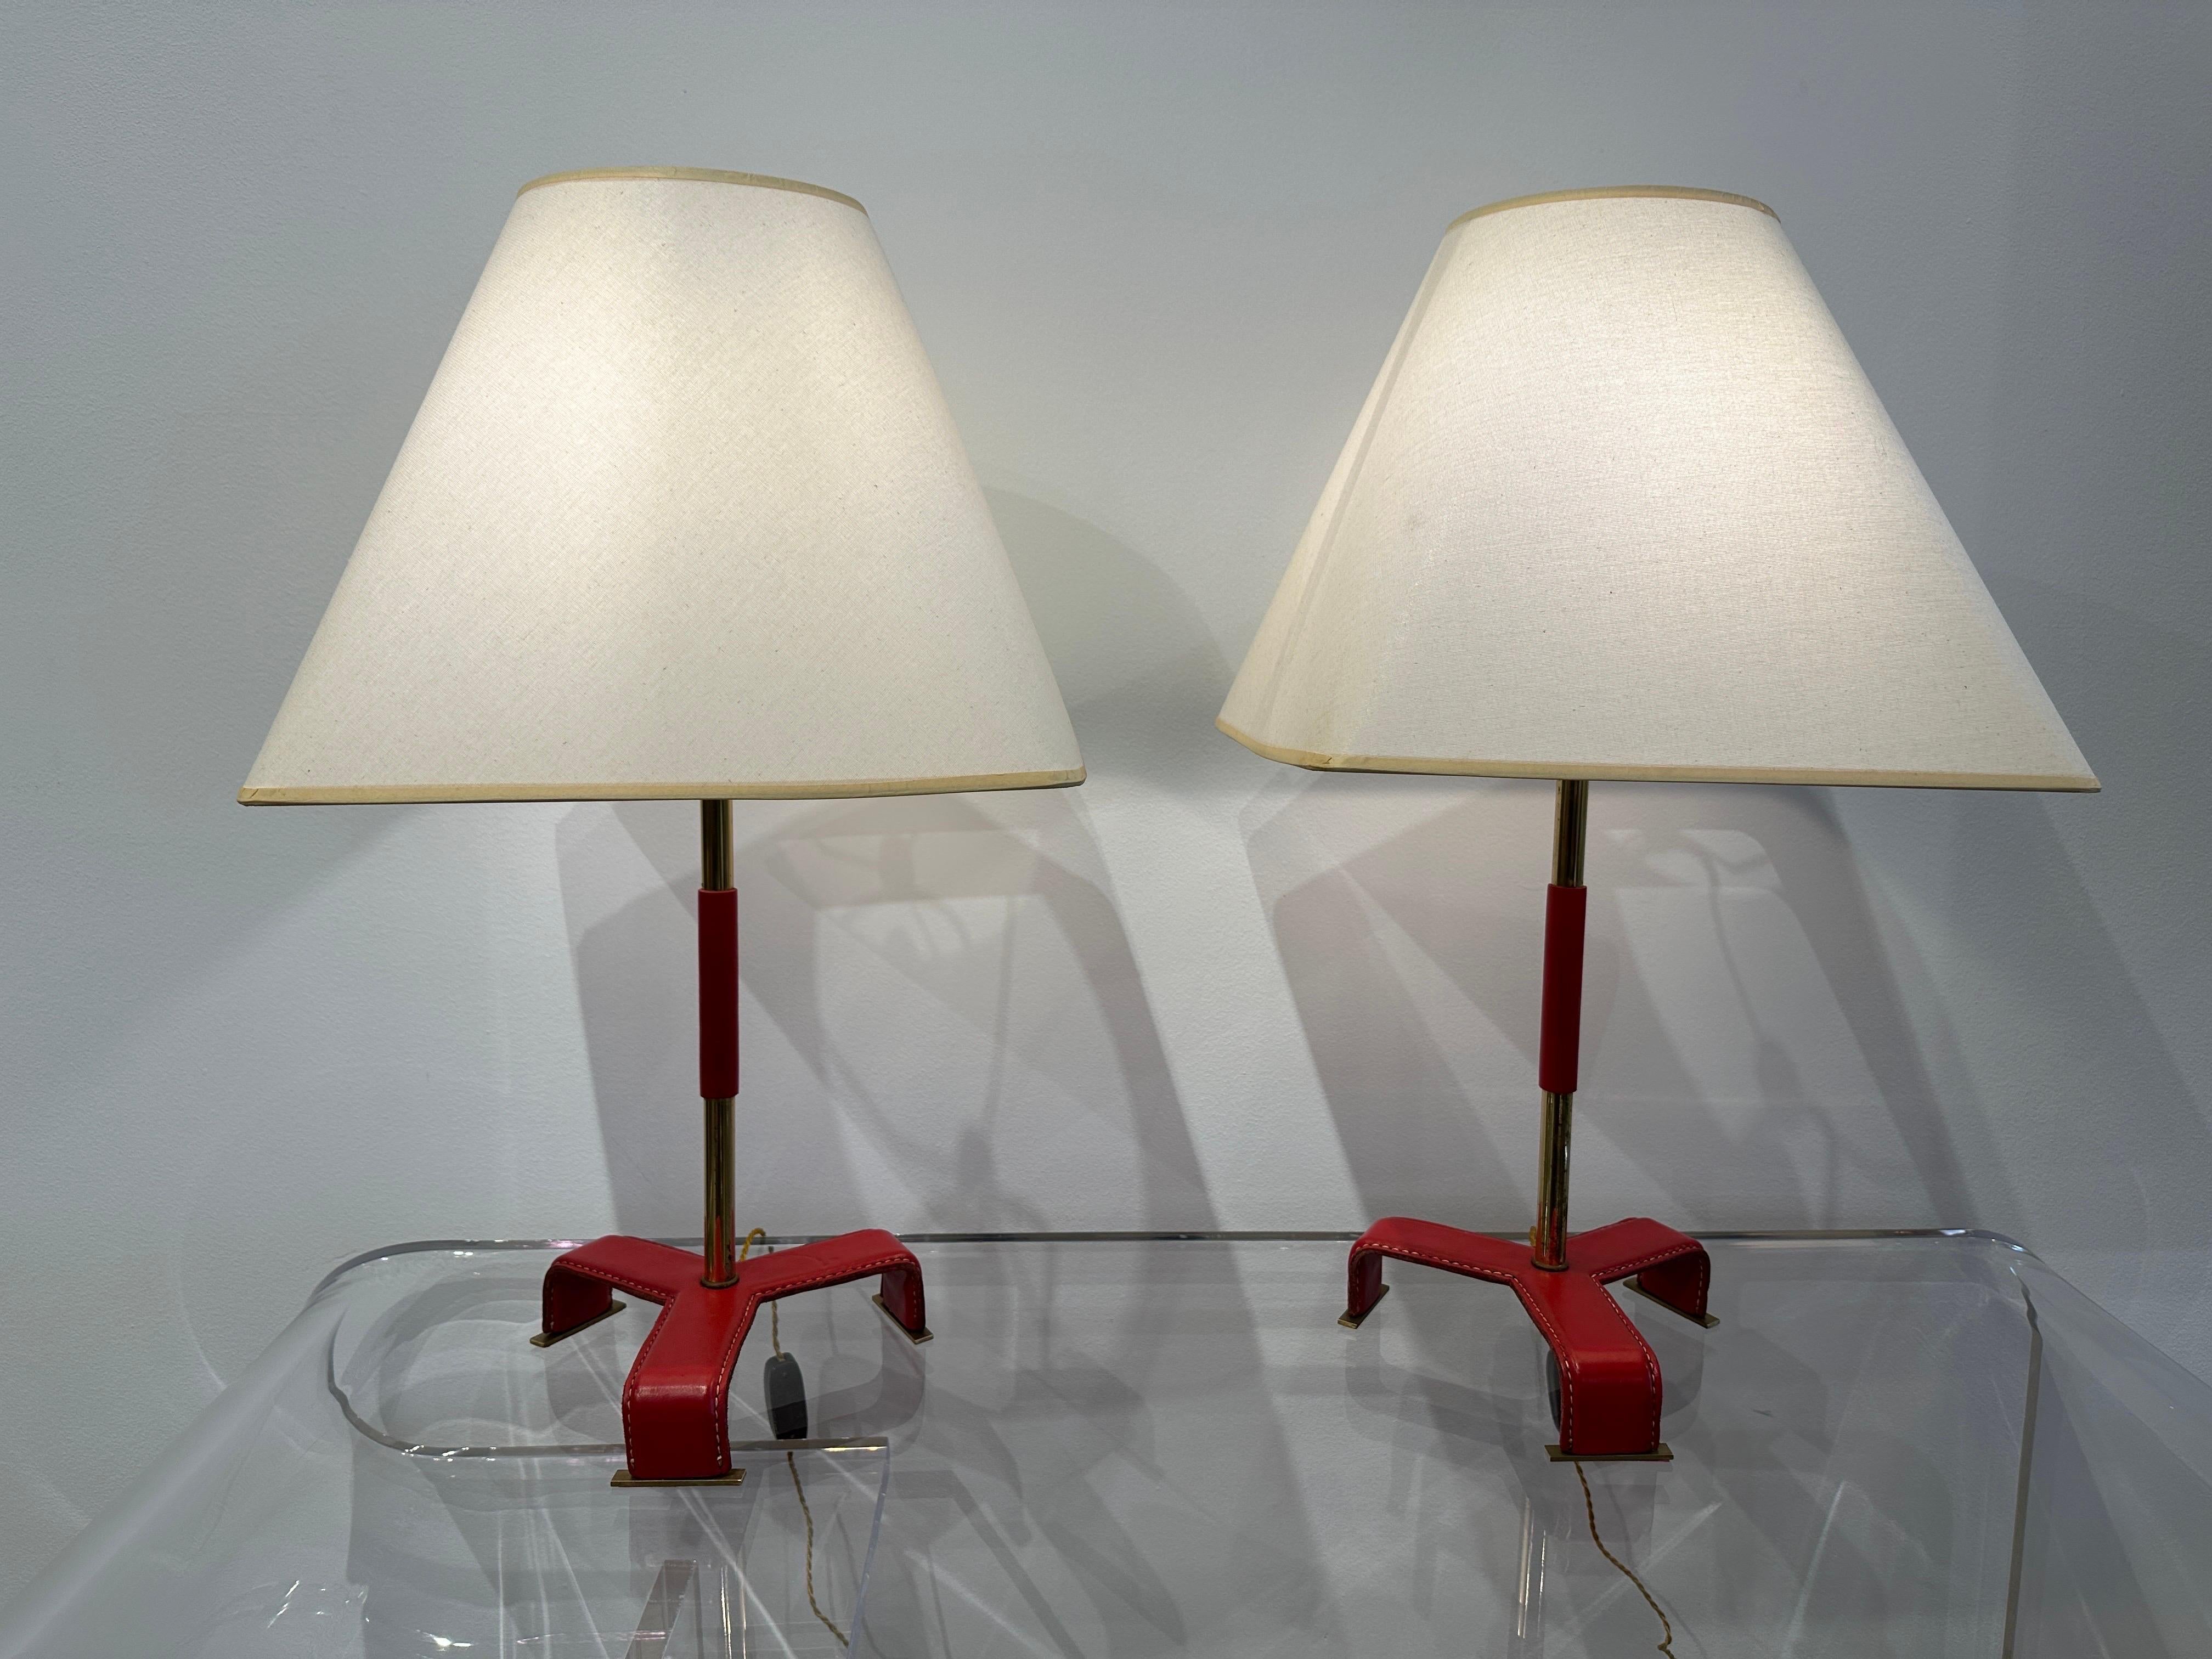 Vintage Pair of Jacques Adnet style Red Stitched Leather Table Lamps, 1950's For Sale 6